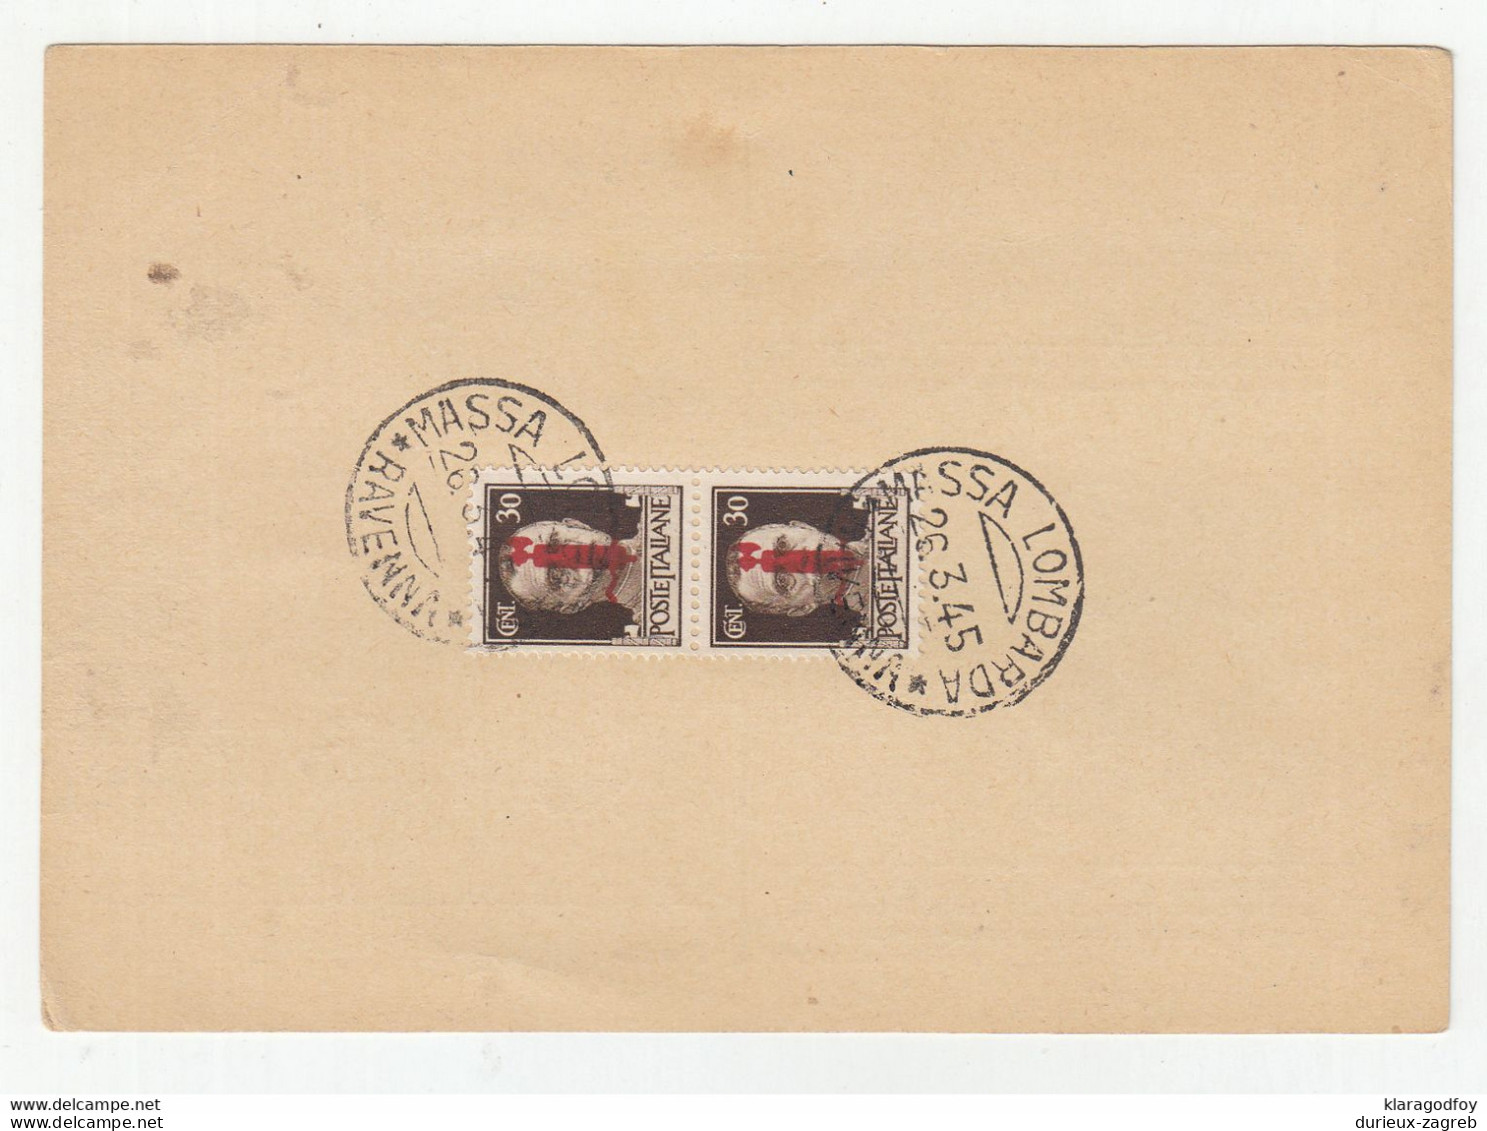 Italy/RSI 16 German feldpost postcards with Massa Lombarda 26.3.45. postmarked stamps on the back  not posted